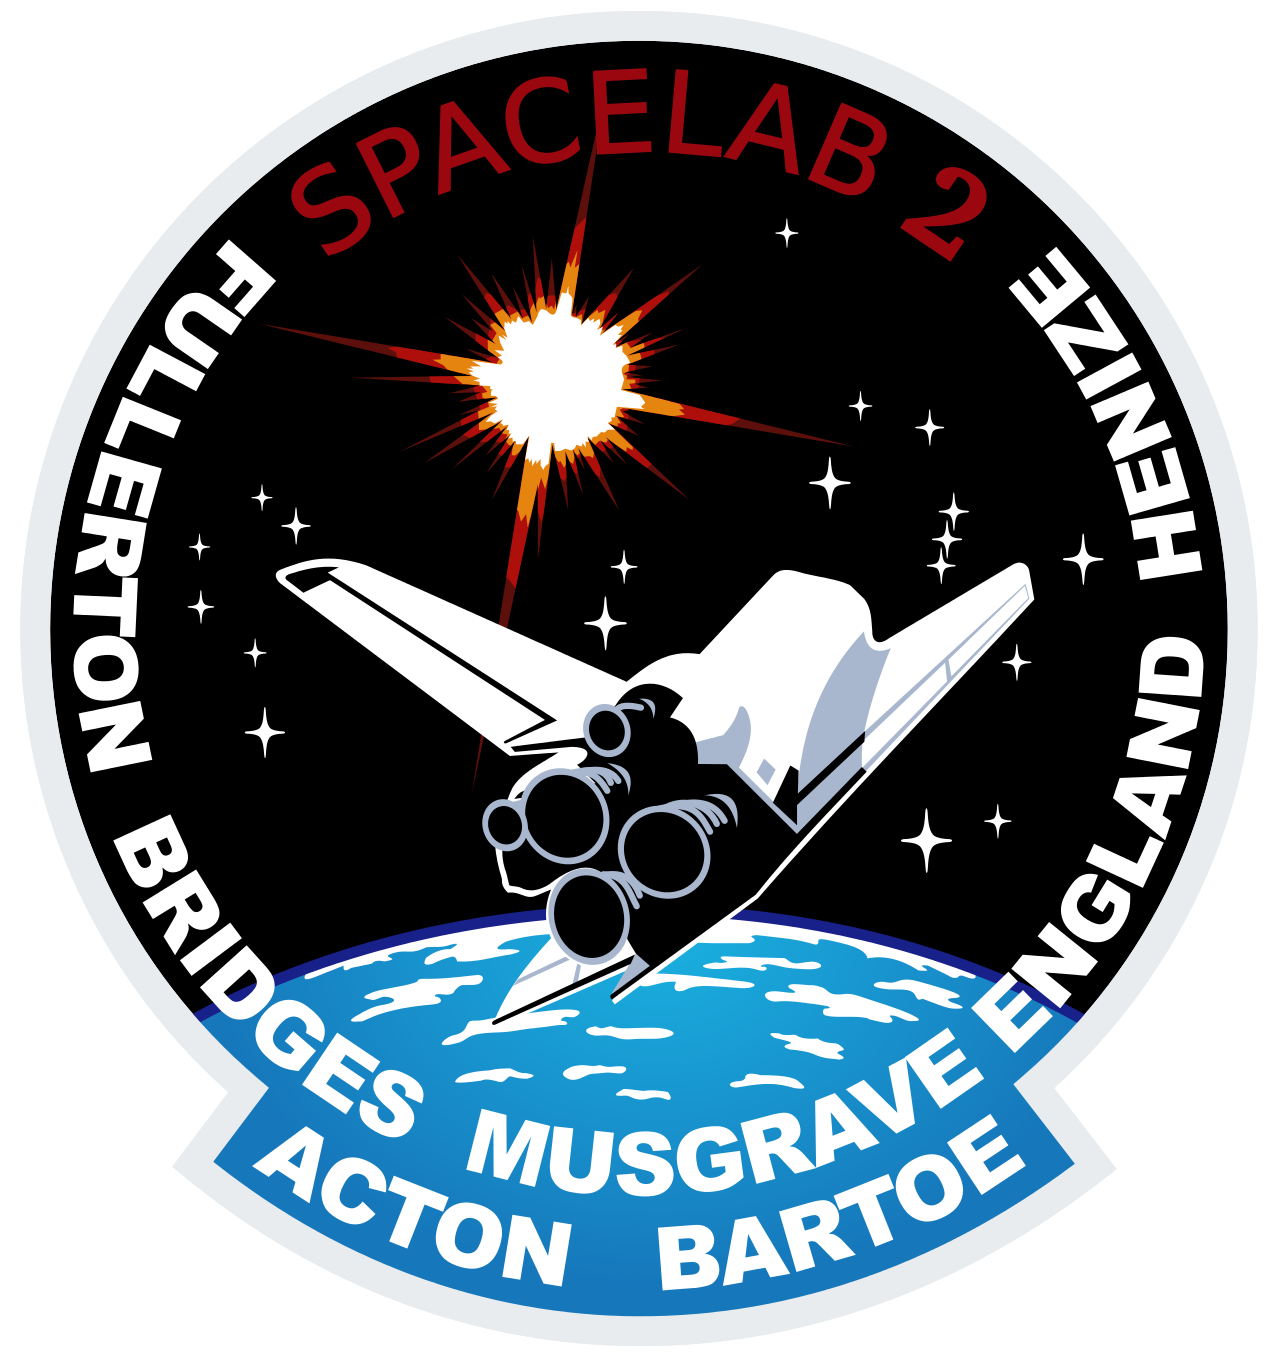 Mission patch for STS-51-F